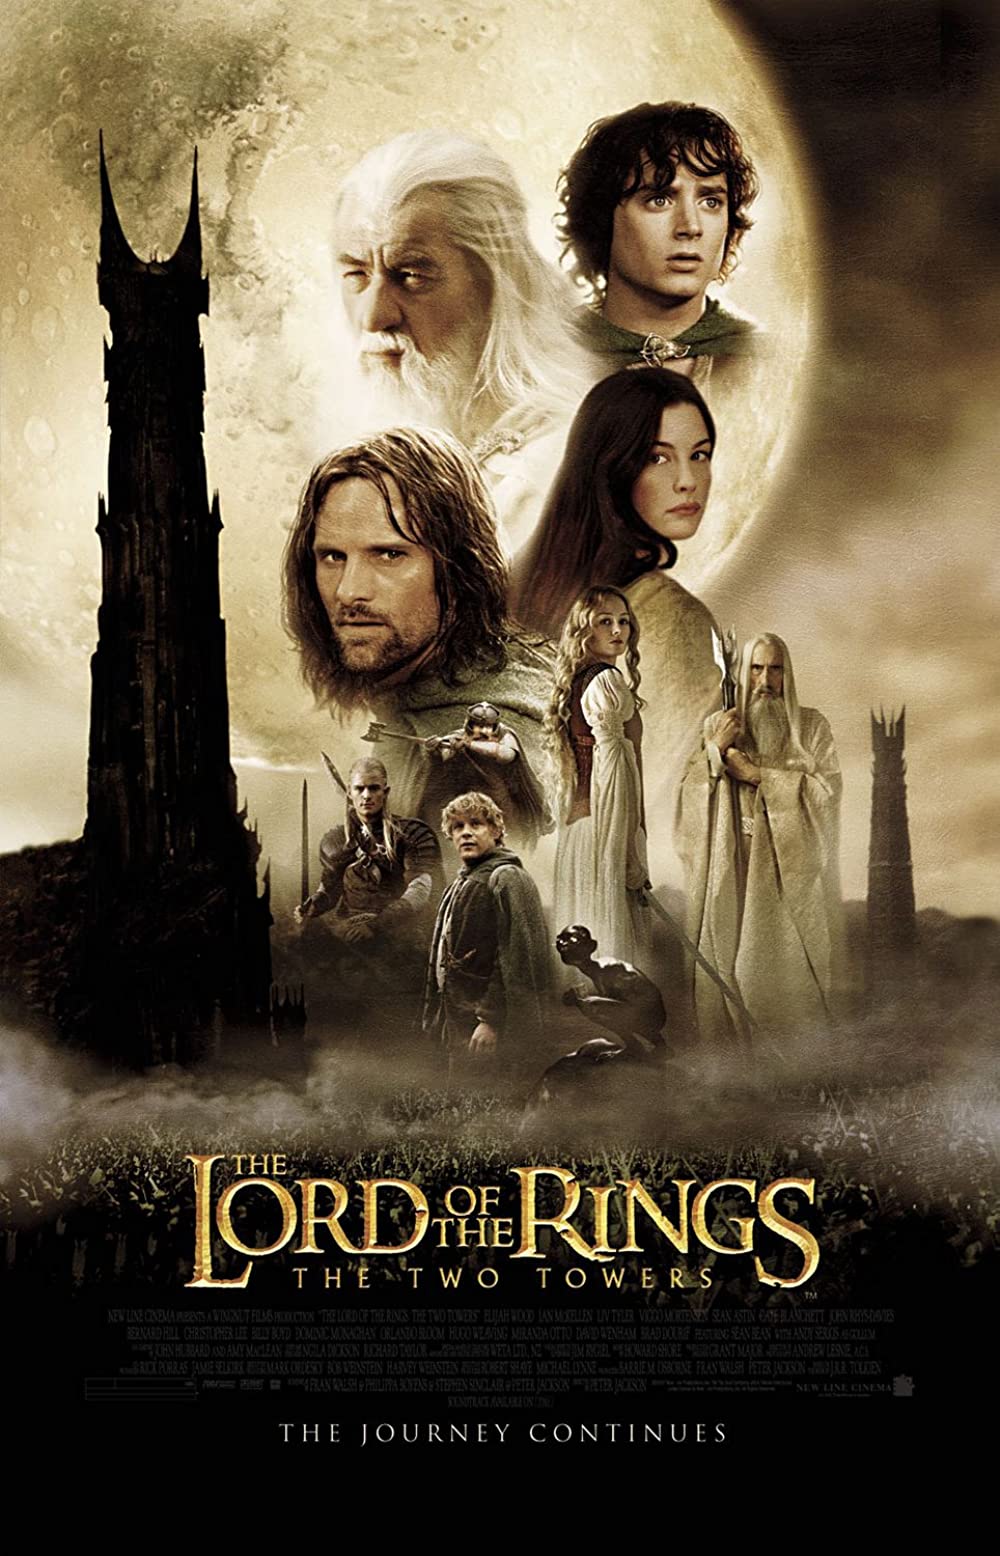 The Lord of the Rings: The Two Towers Soundtrack